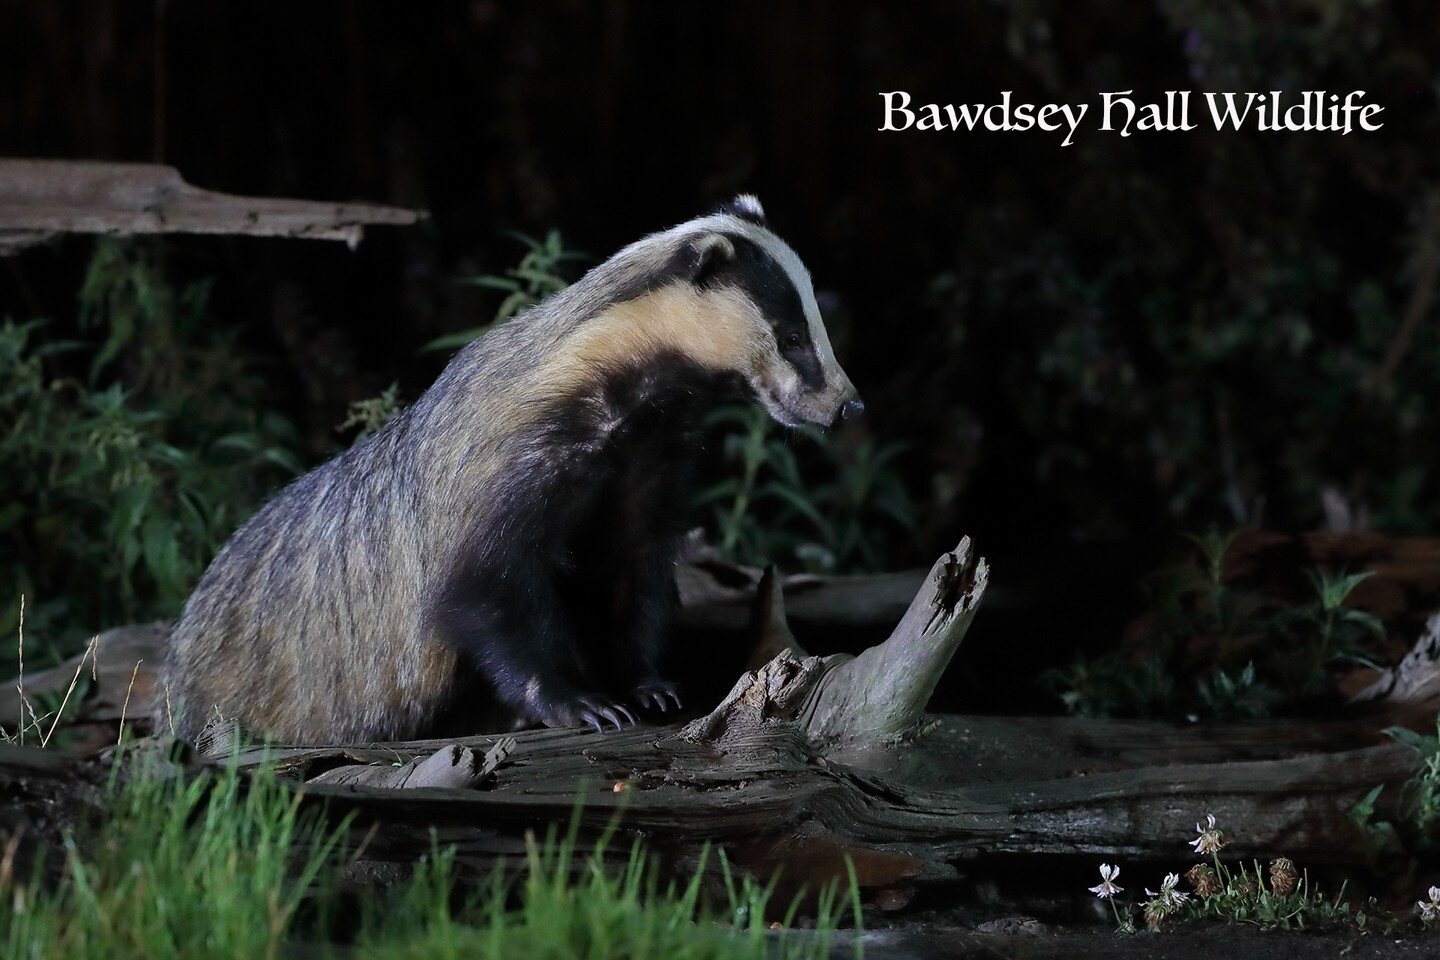 Fantastic nighttime photography currently, with regular and multiple visit&hellip;badgers, polecats , owls and muntjac.

Fancy photographing the #Polecat, #Badgers, #Owls and #Herons featured on #bbcwinterwatch @bbcspringwatch. Why not book yourself 